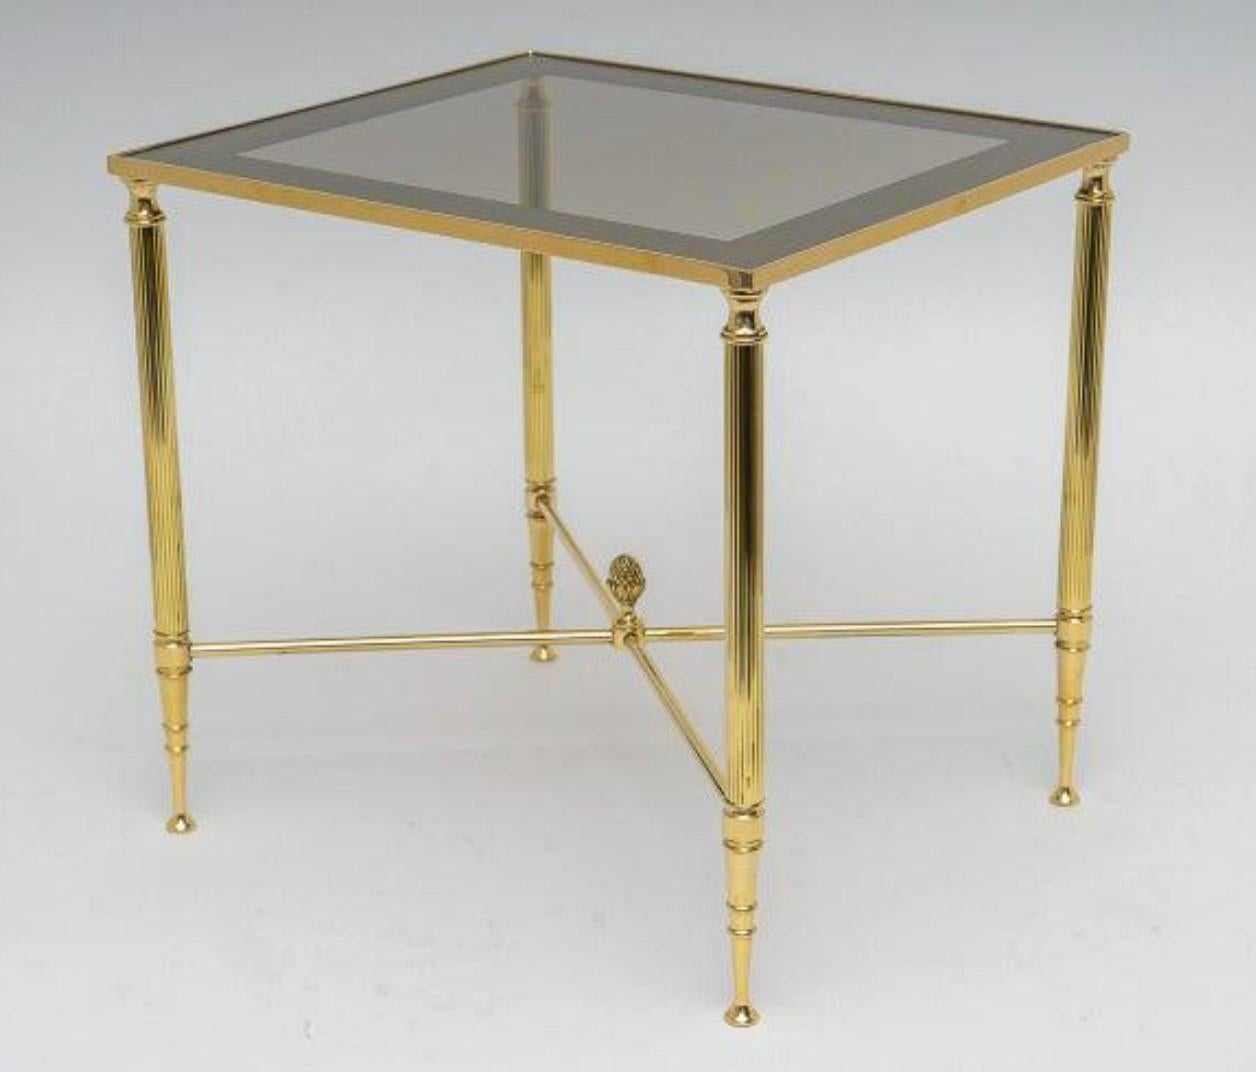 French Vintage Hollywood Regency Brass & Glass Nesting Tables attr. to Maison Jansen For Sale